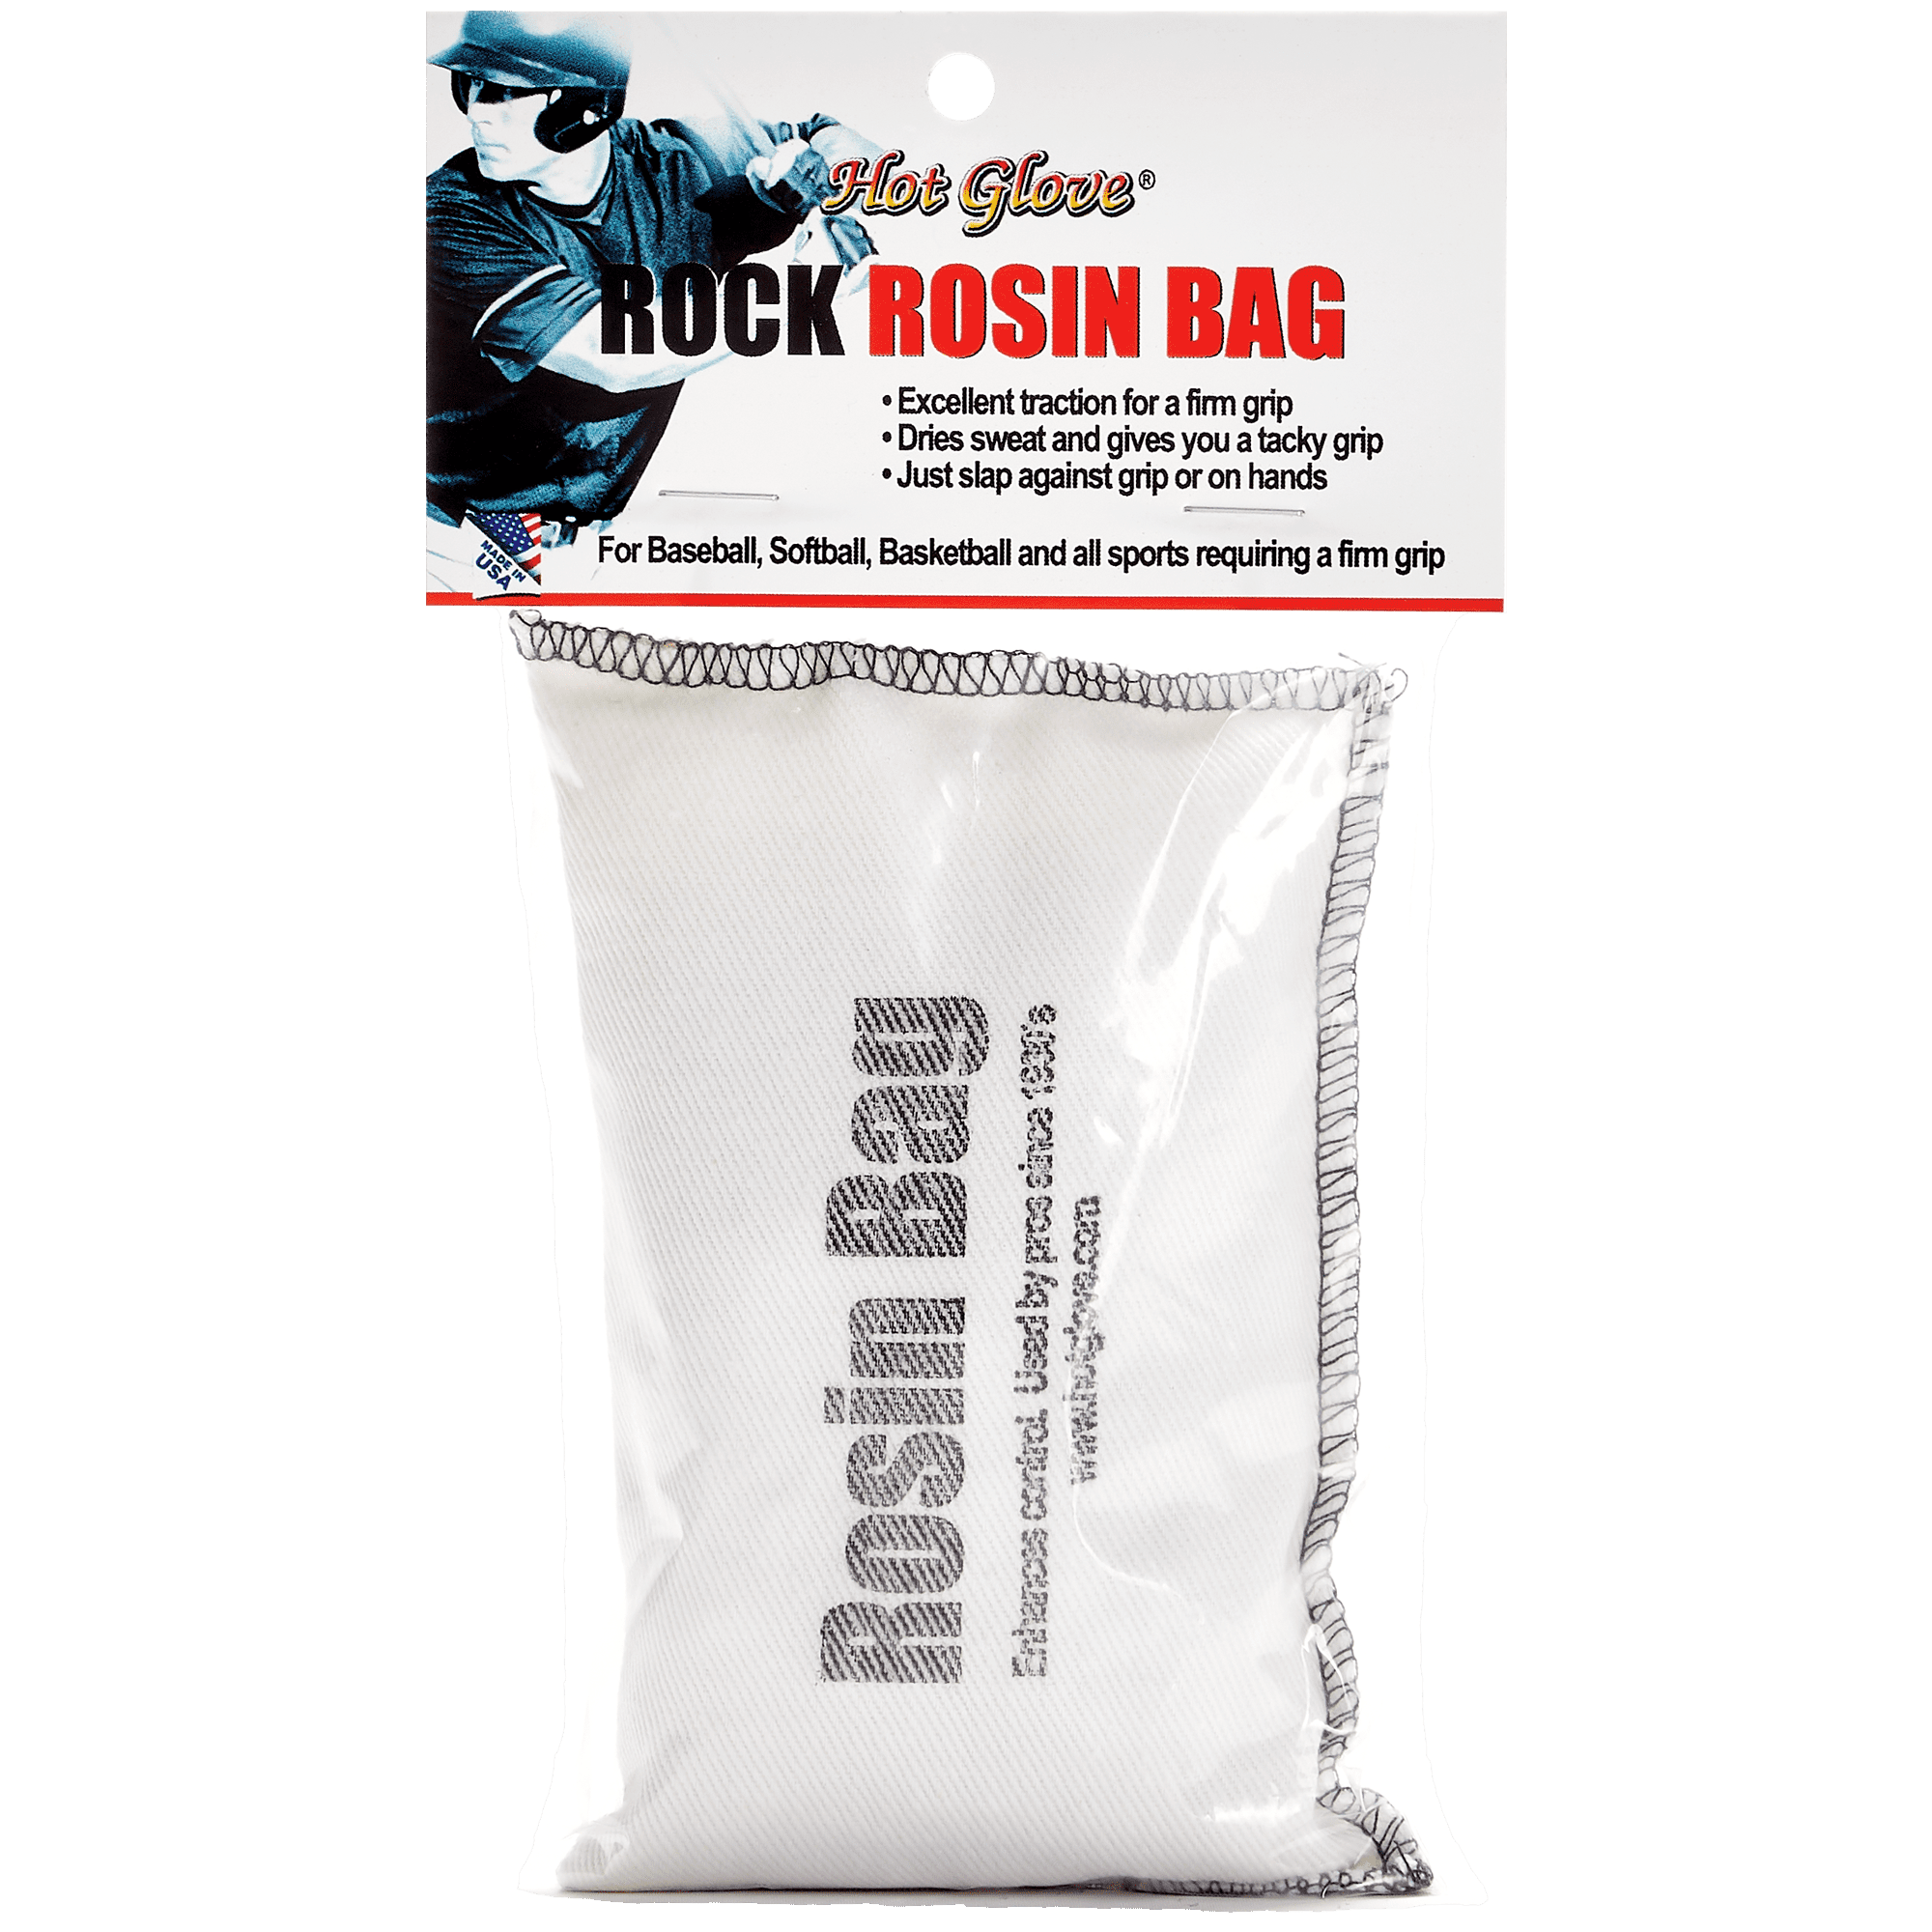 Details about   New Hot Glove Rock Rosin Bag Baseball Pitching 